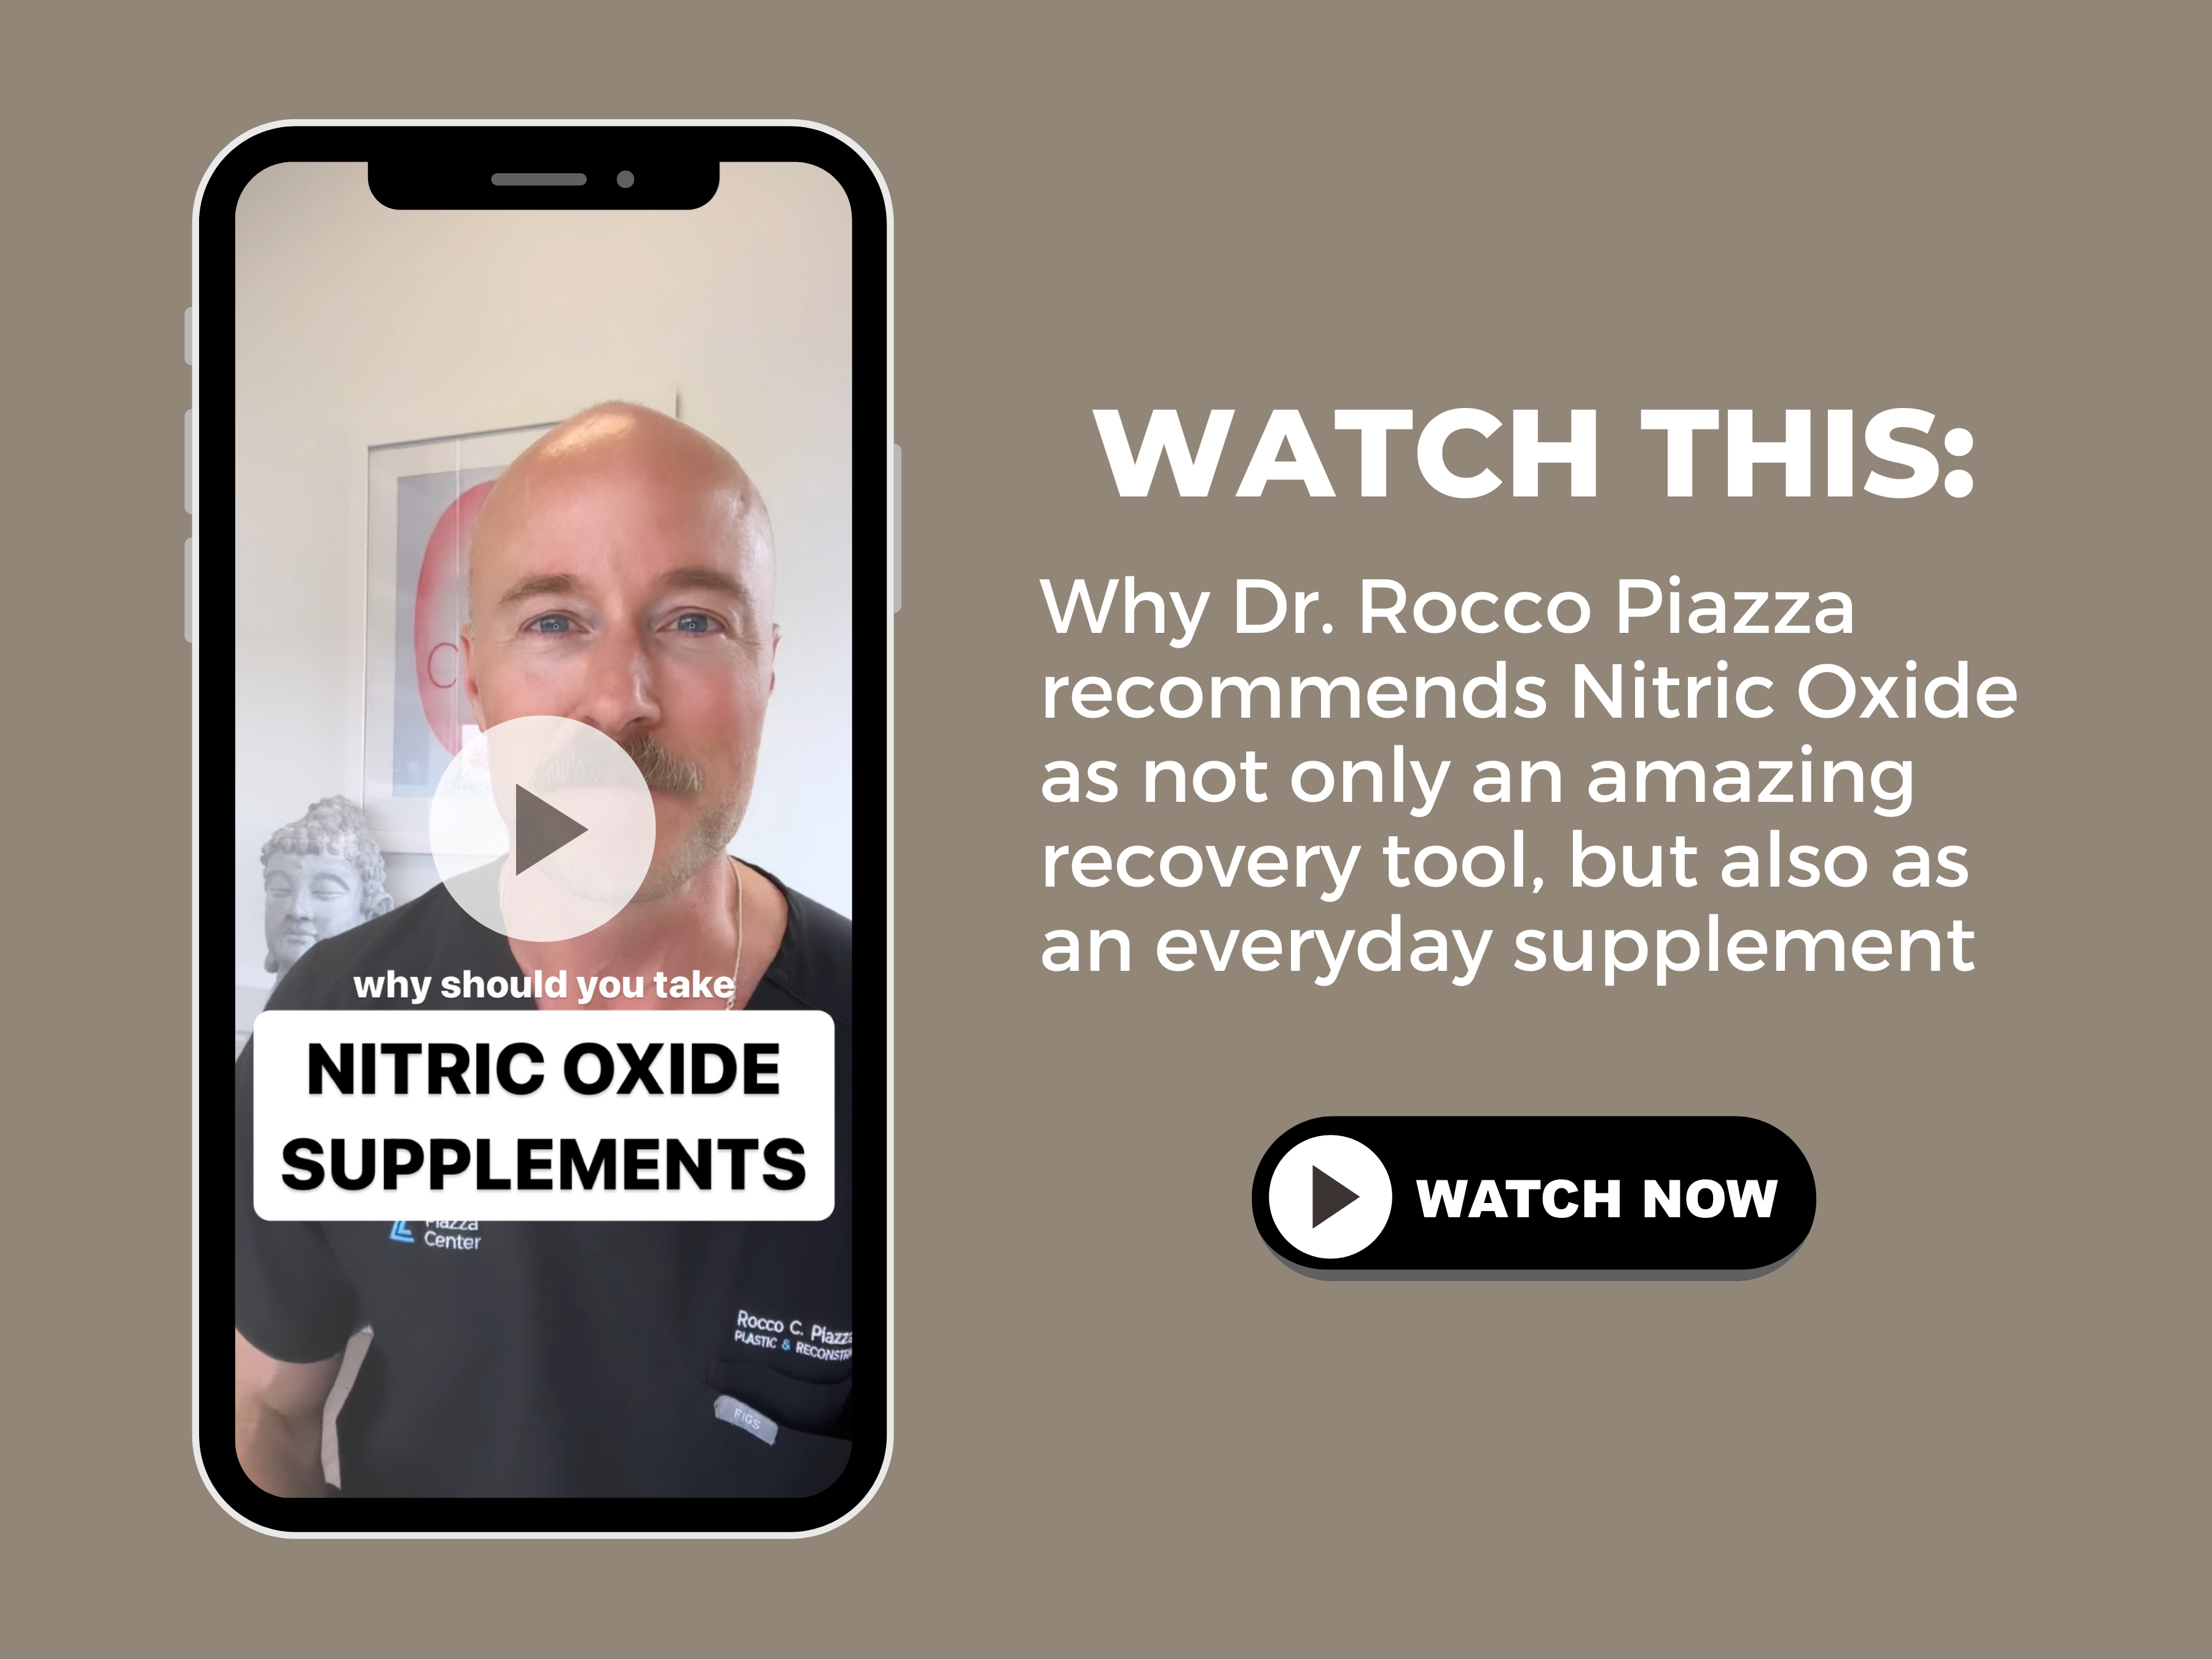 Dr. Piazza on Nitric Oxide supplements